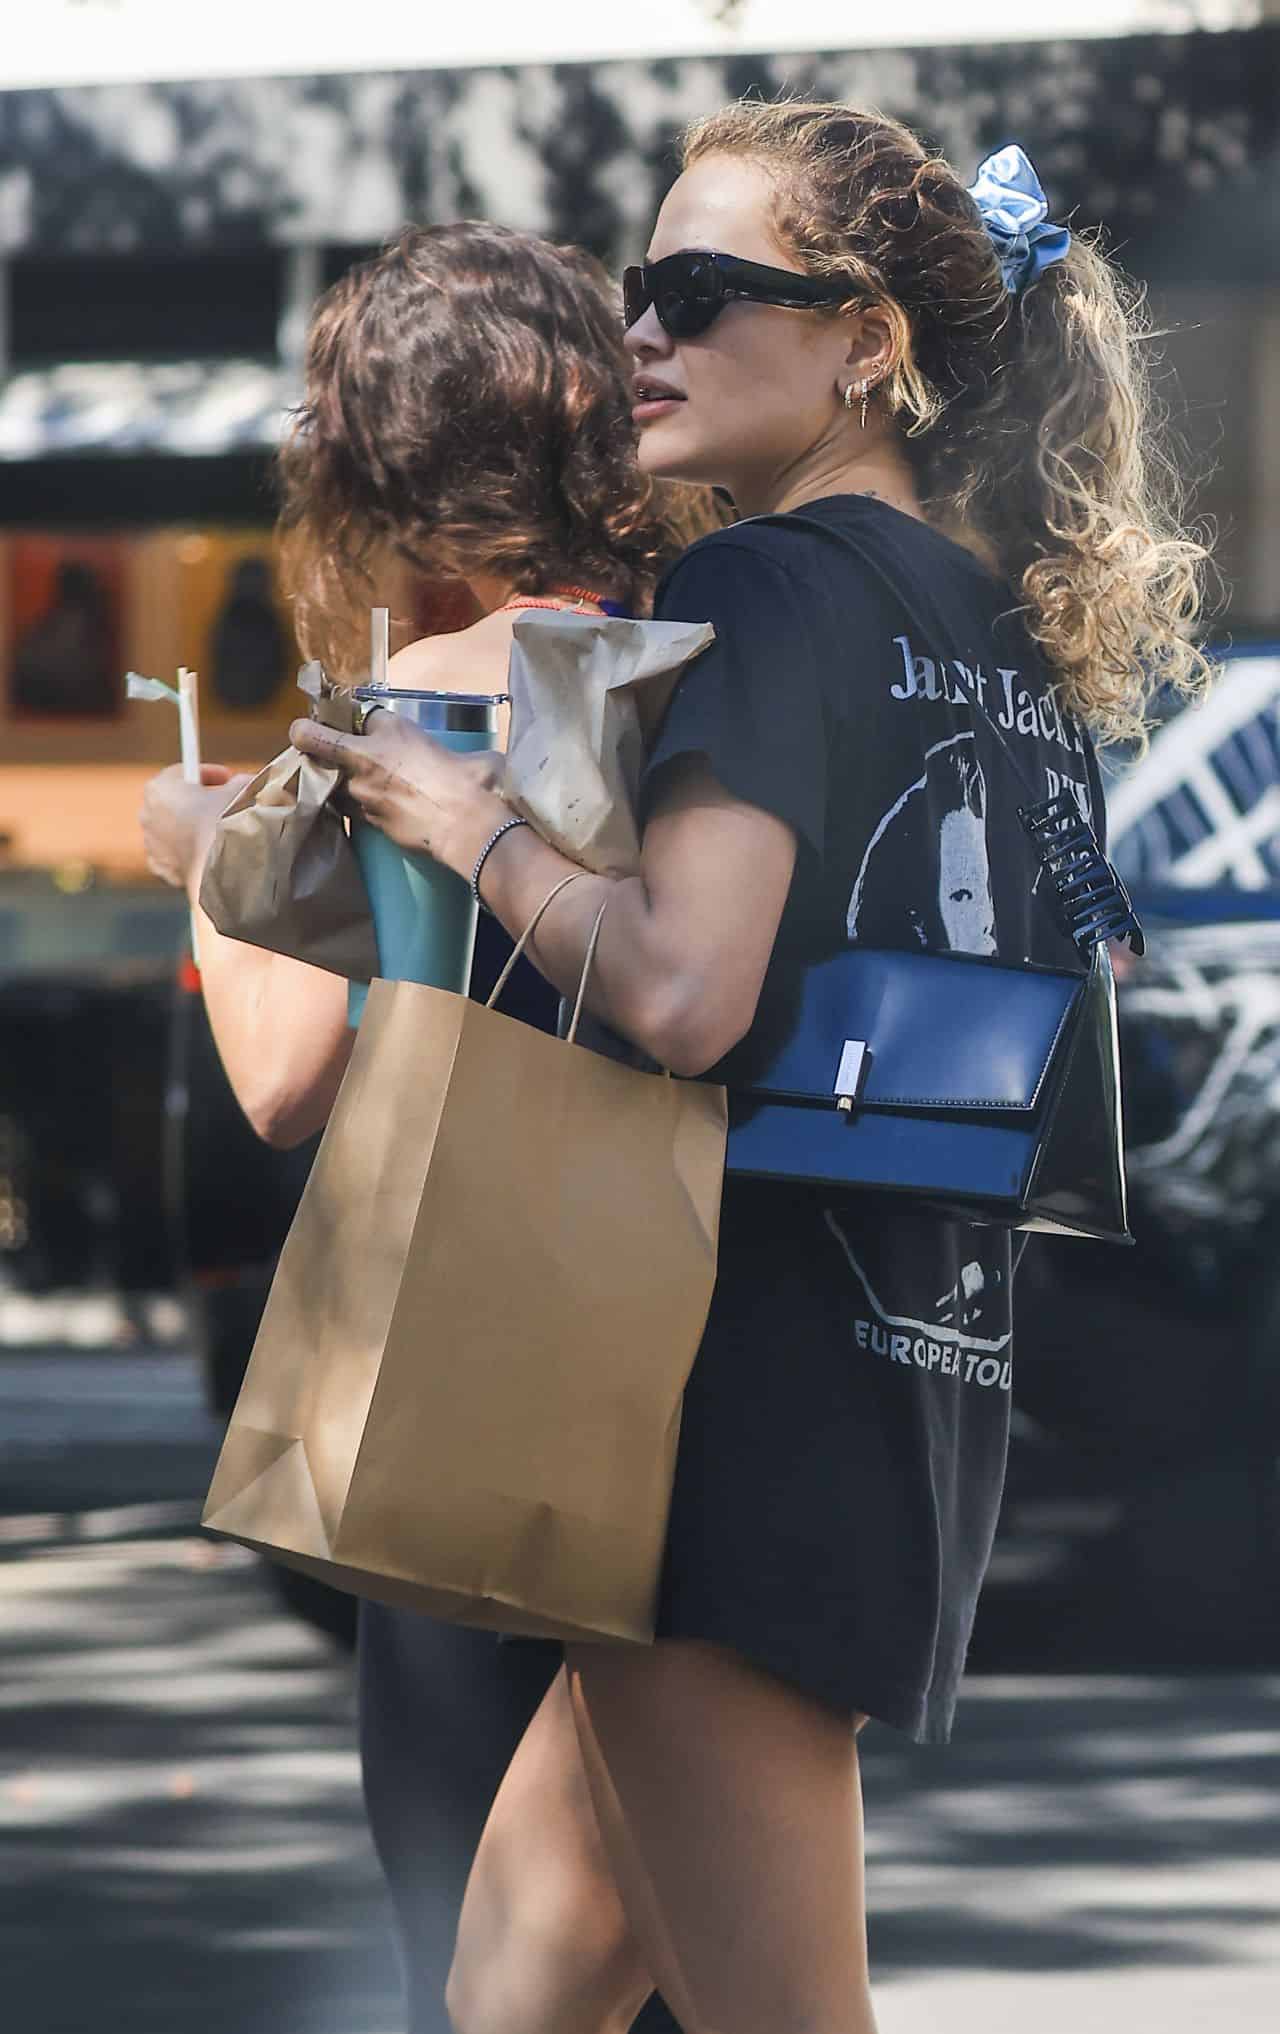 Rita Ora Looks Great in a Vintage Janet Jackson T-Shirt at Double Bay